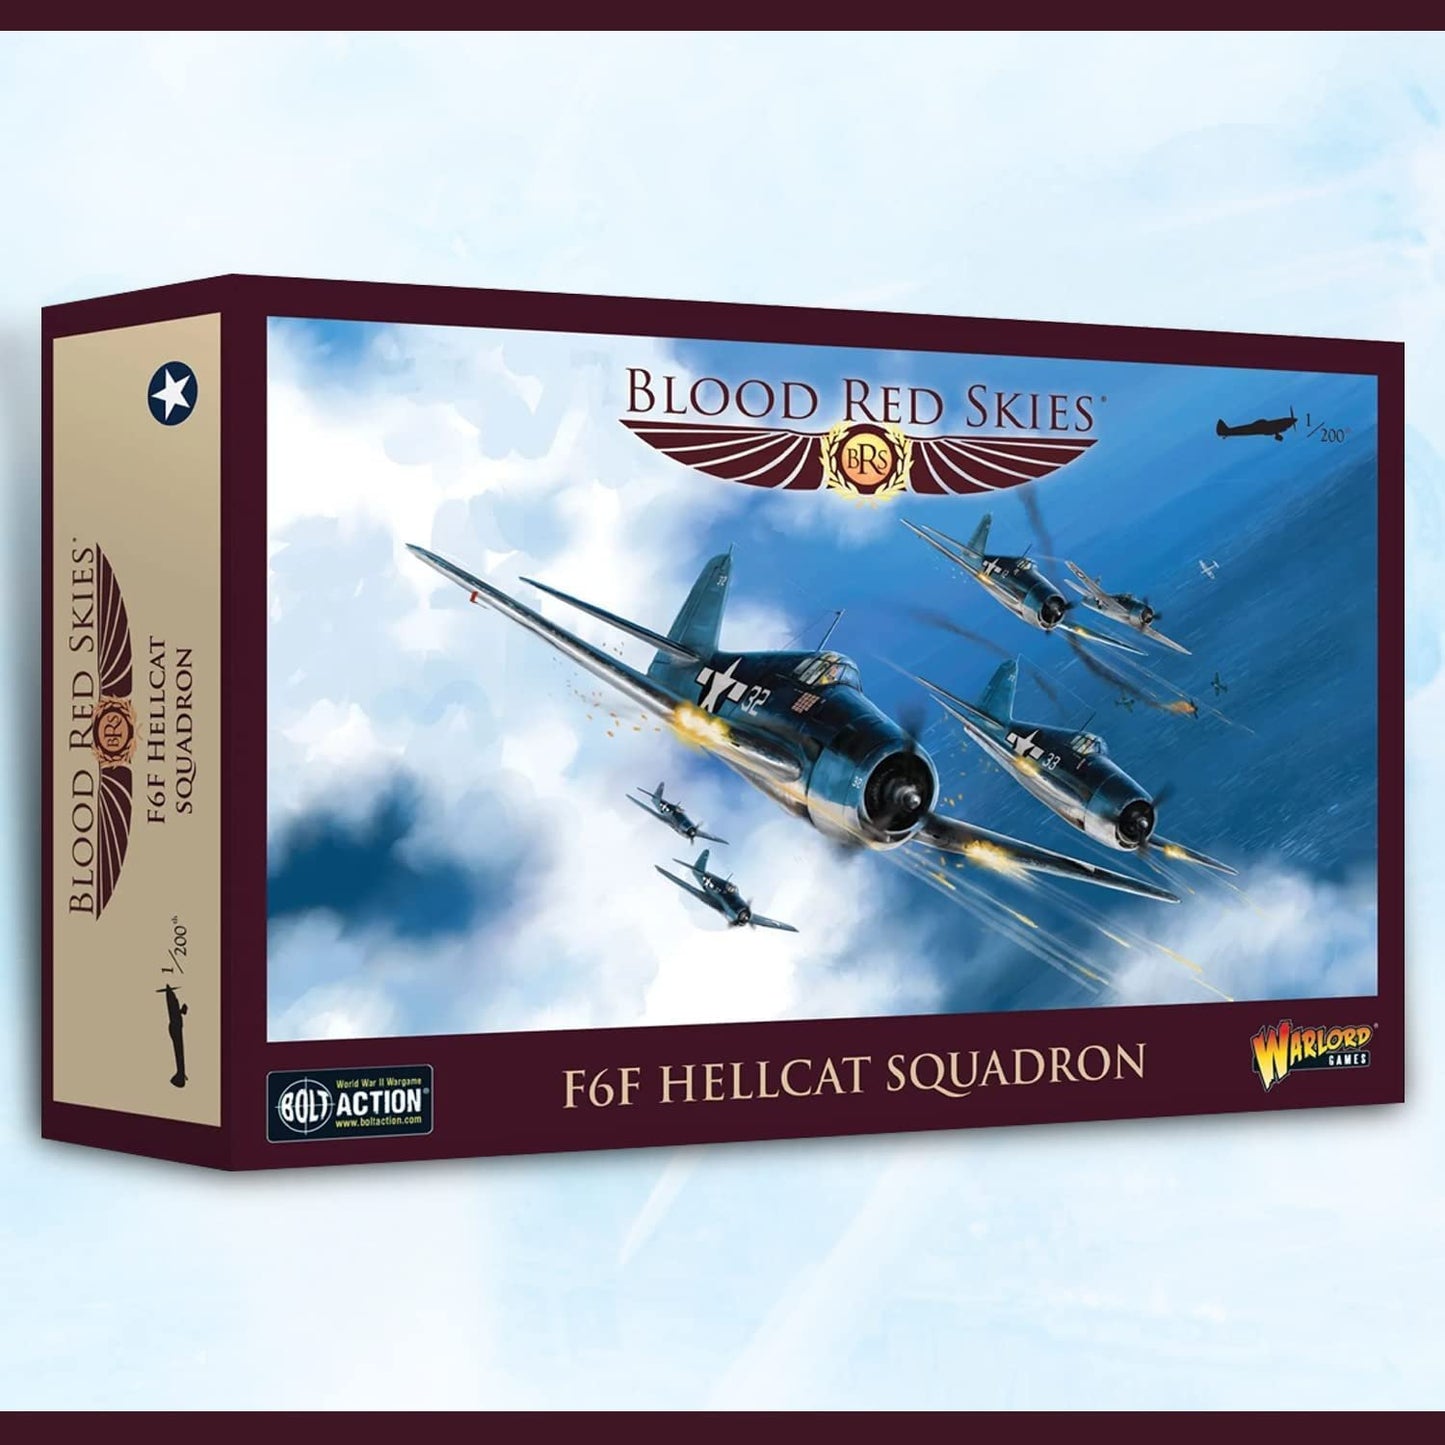 Blood Red Skies- US Air Forces: F6F Hellcat Squadron